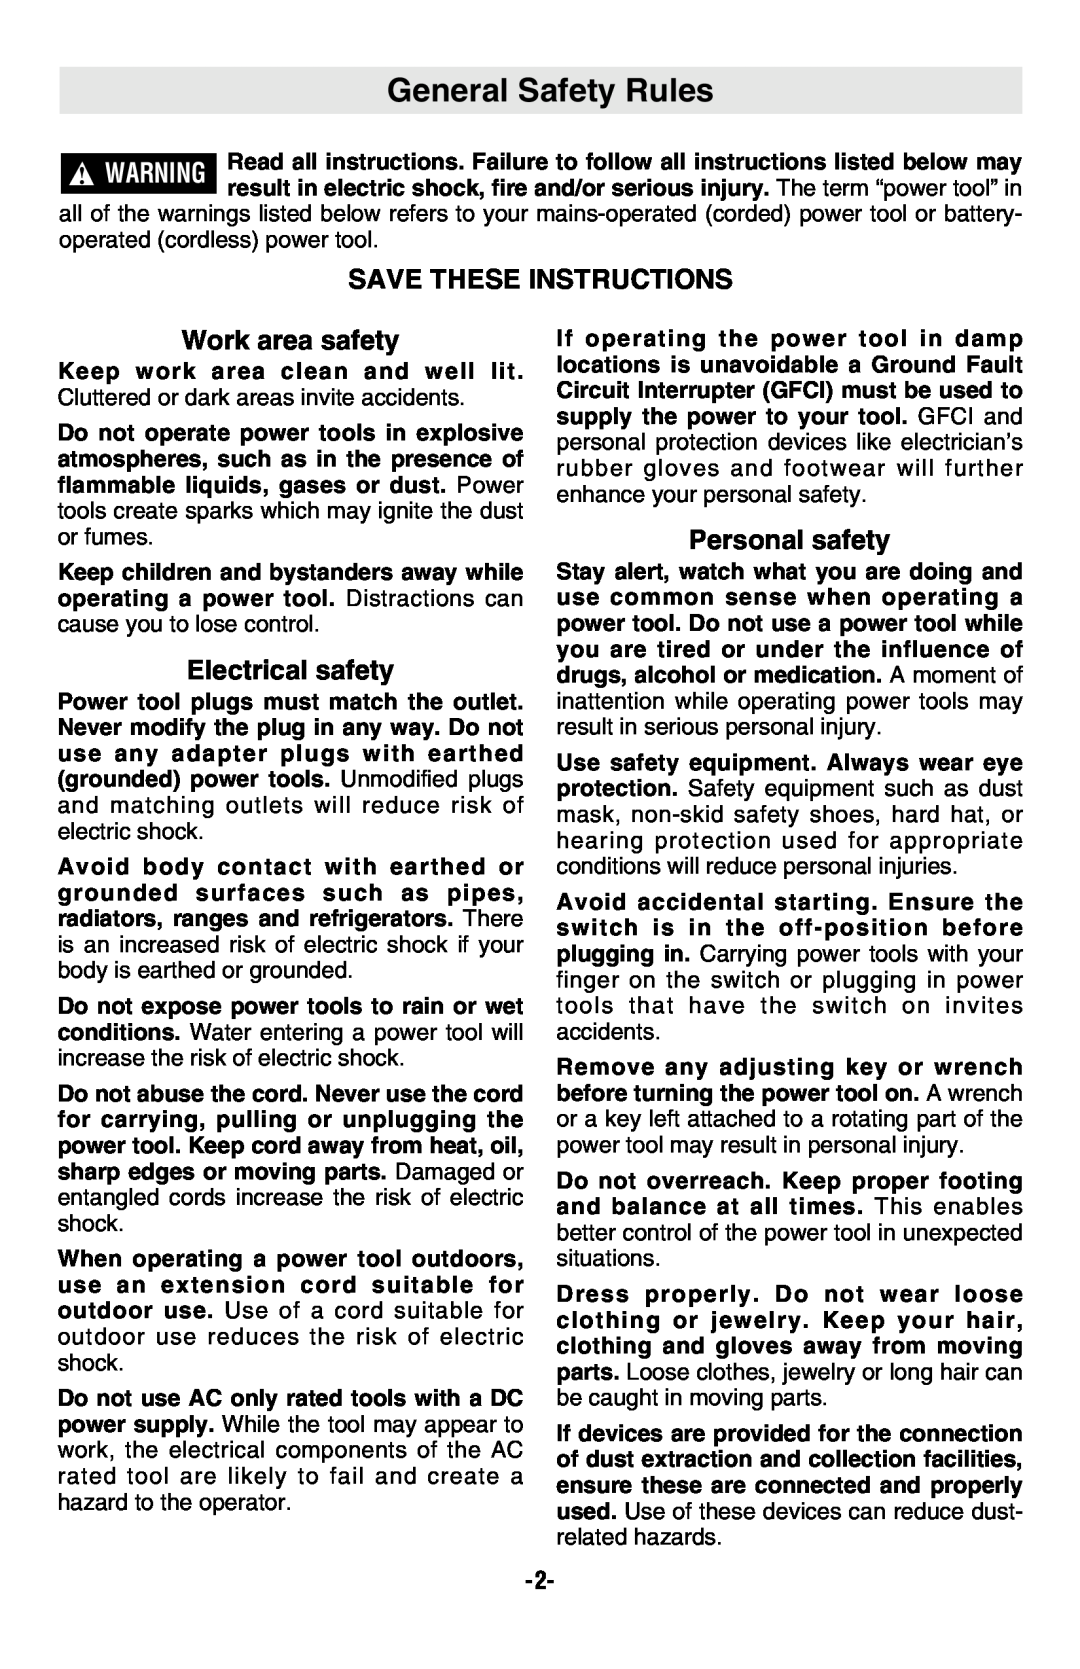 Bosch Power Tools 1005VSR, 1004VSR manual General Safety Rules, Save These Instructions, Work area safety, Electrical safety 